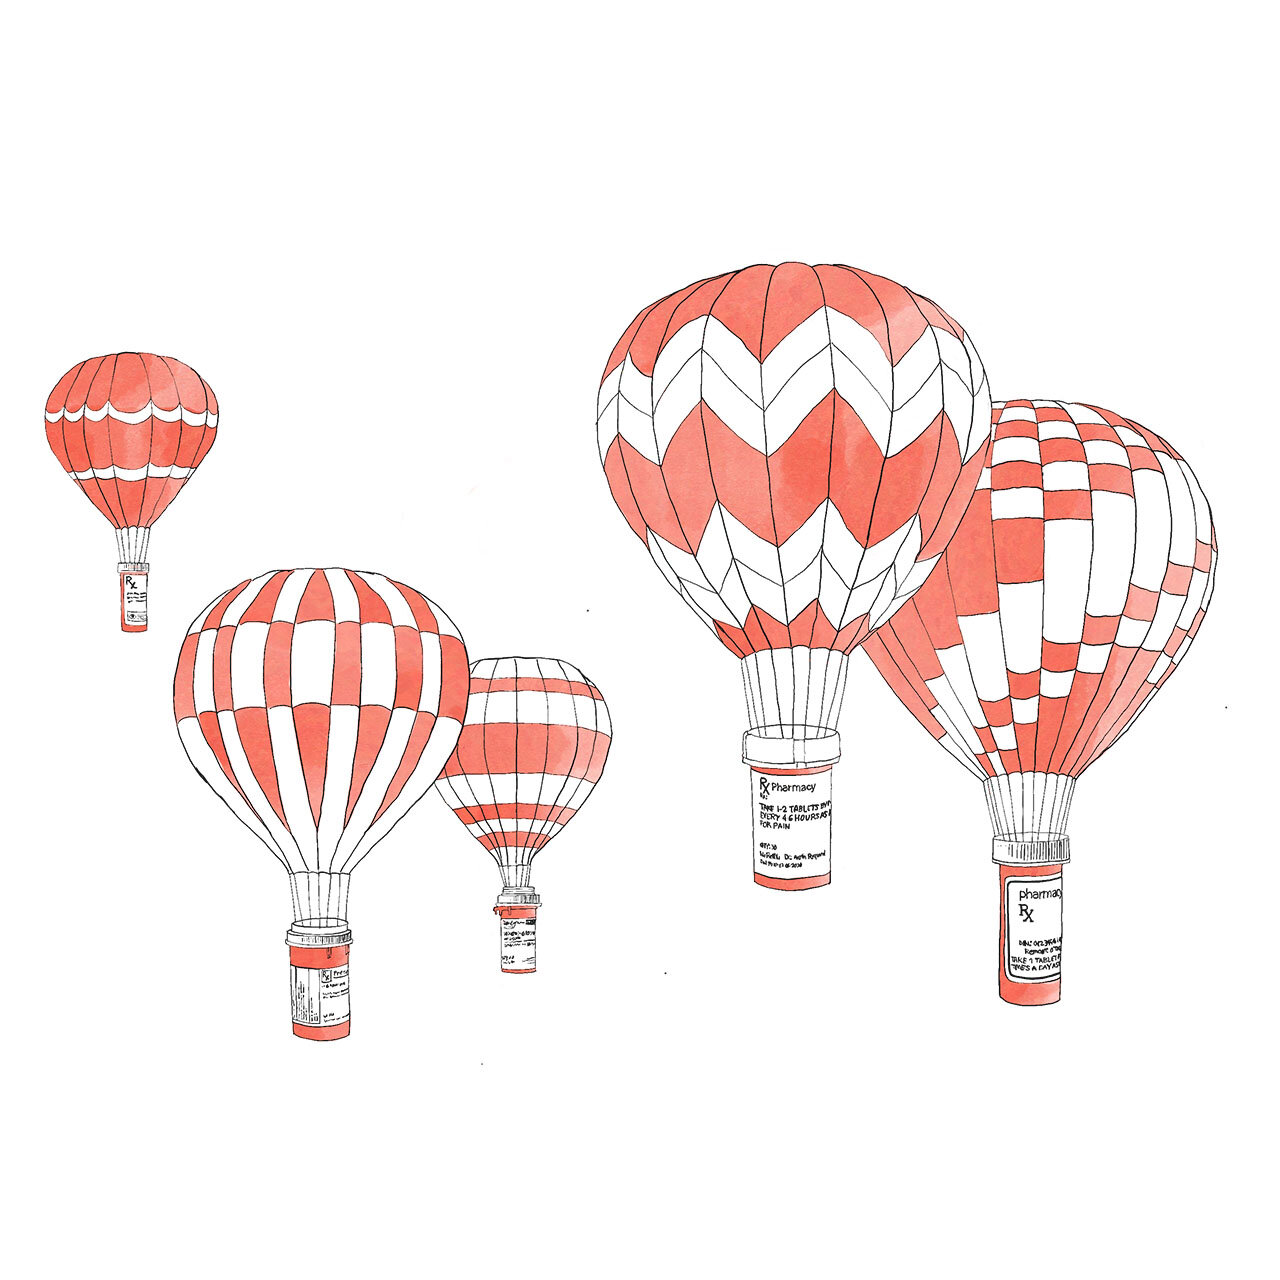 Prescriptions Carried by Hot Air Balloons for Cover My Meds